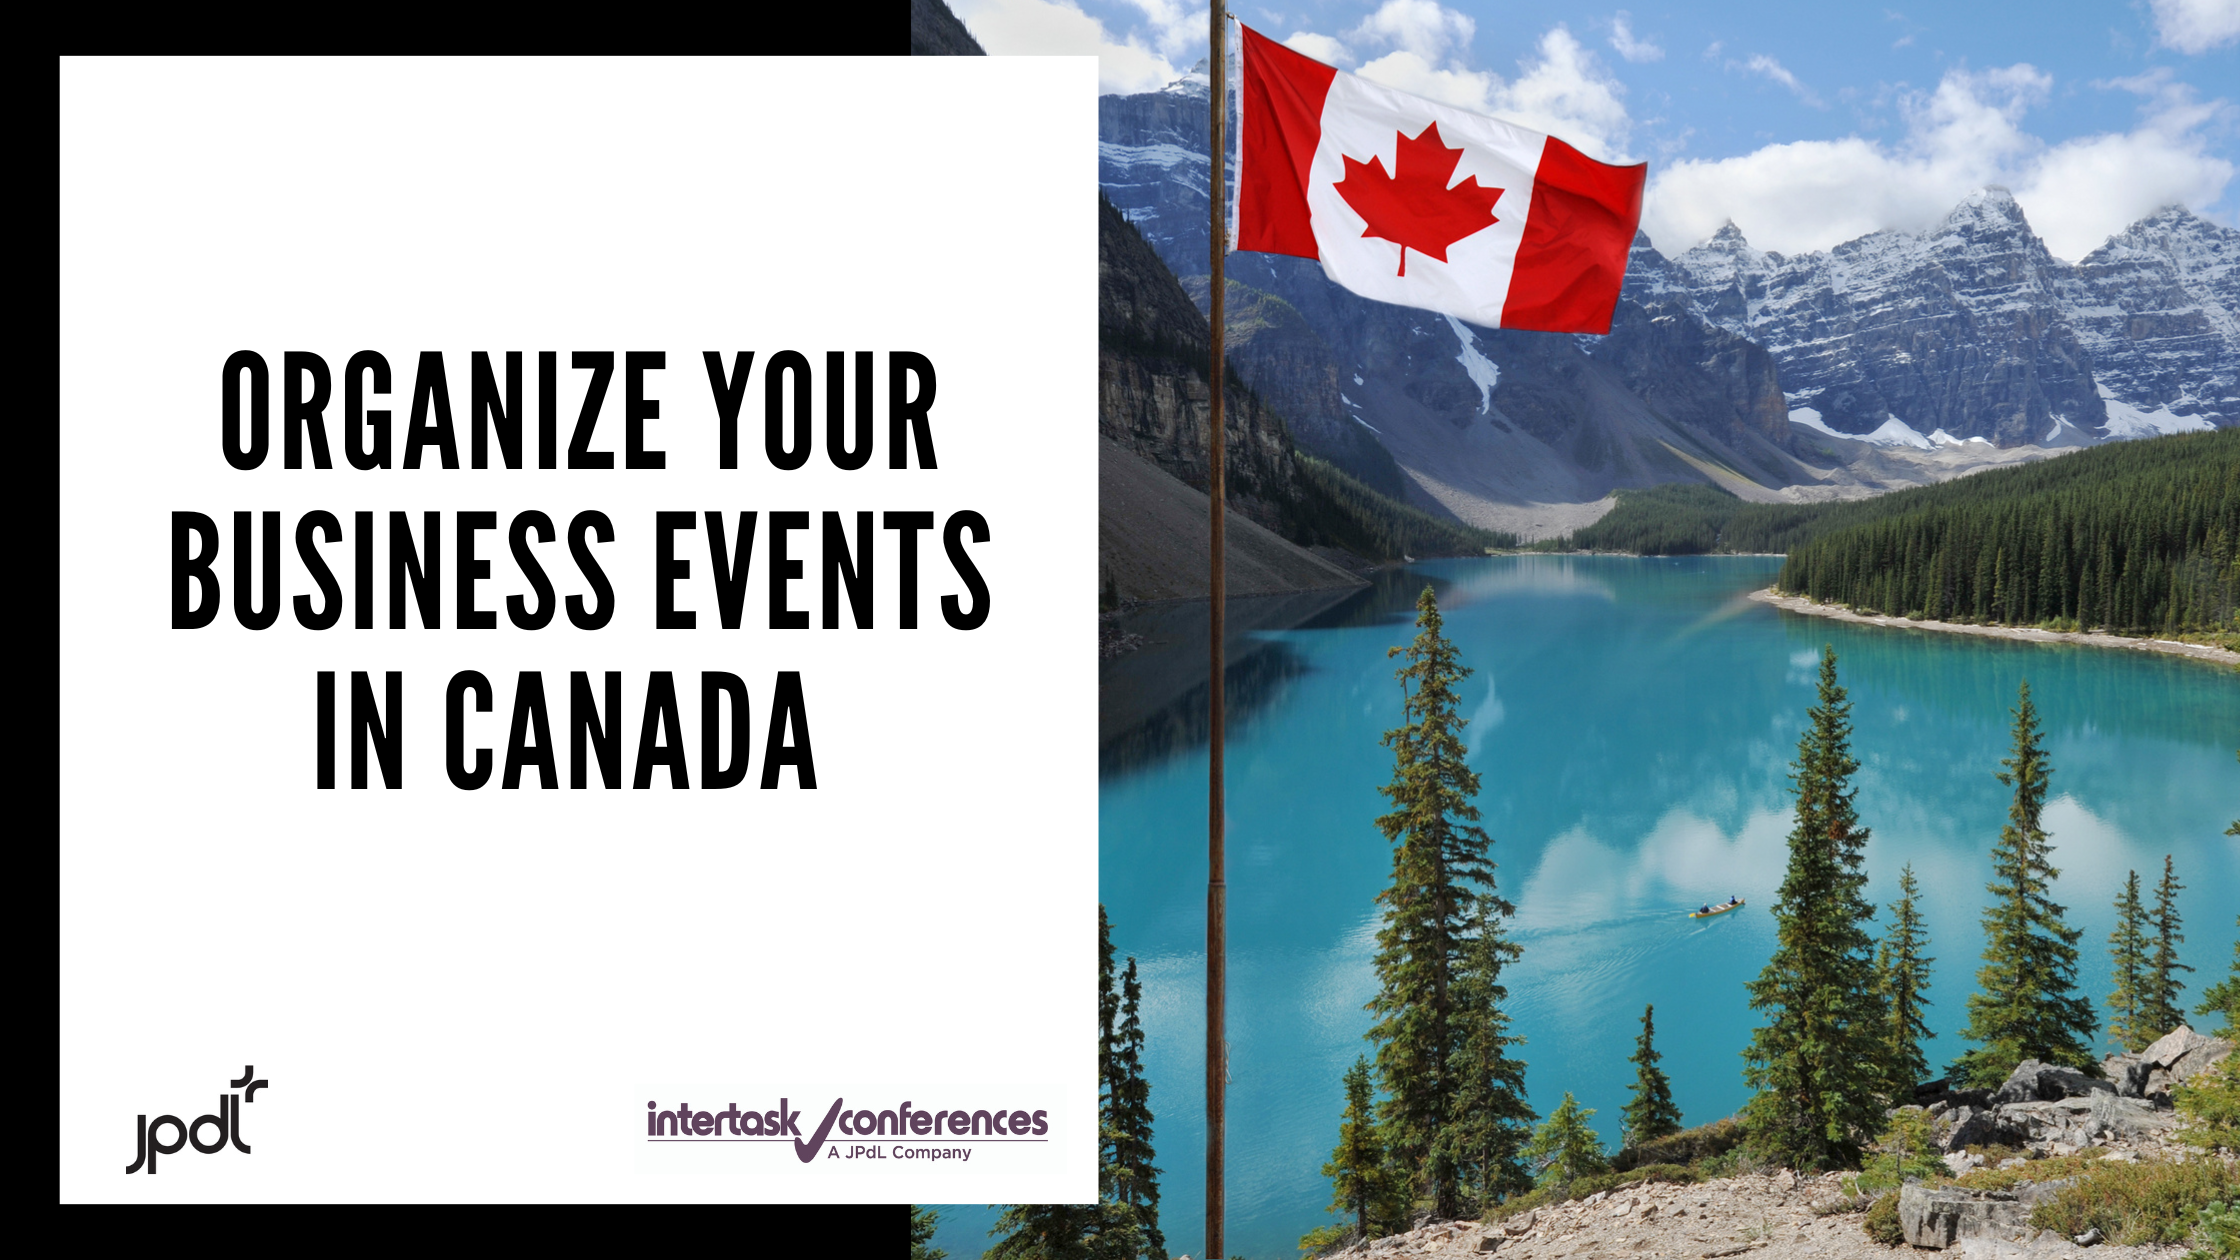 5 reasons to organize your business events in Canada